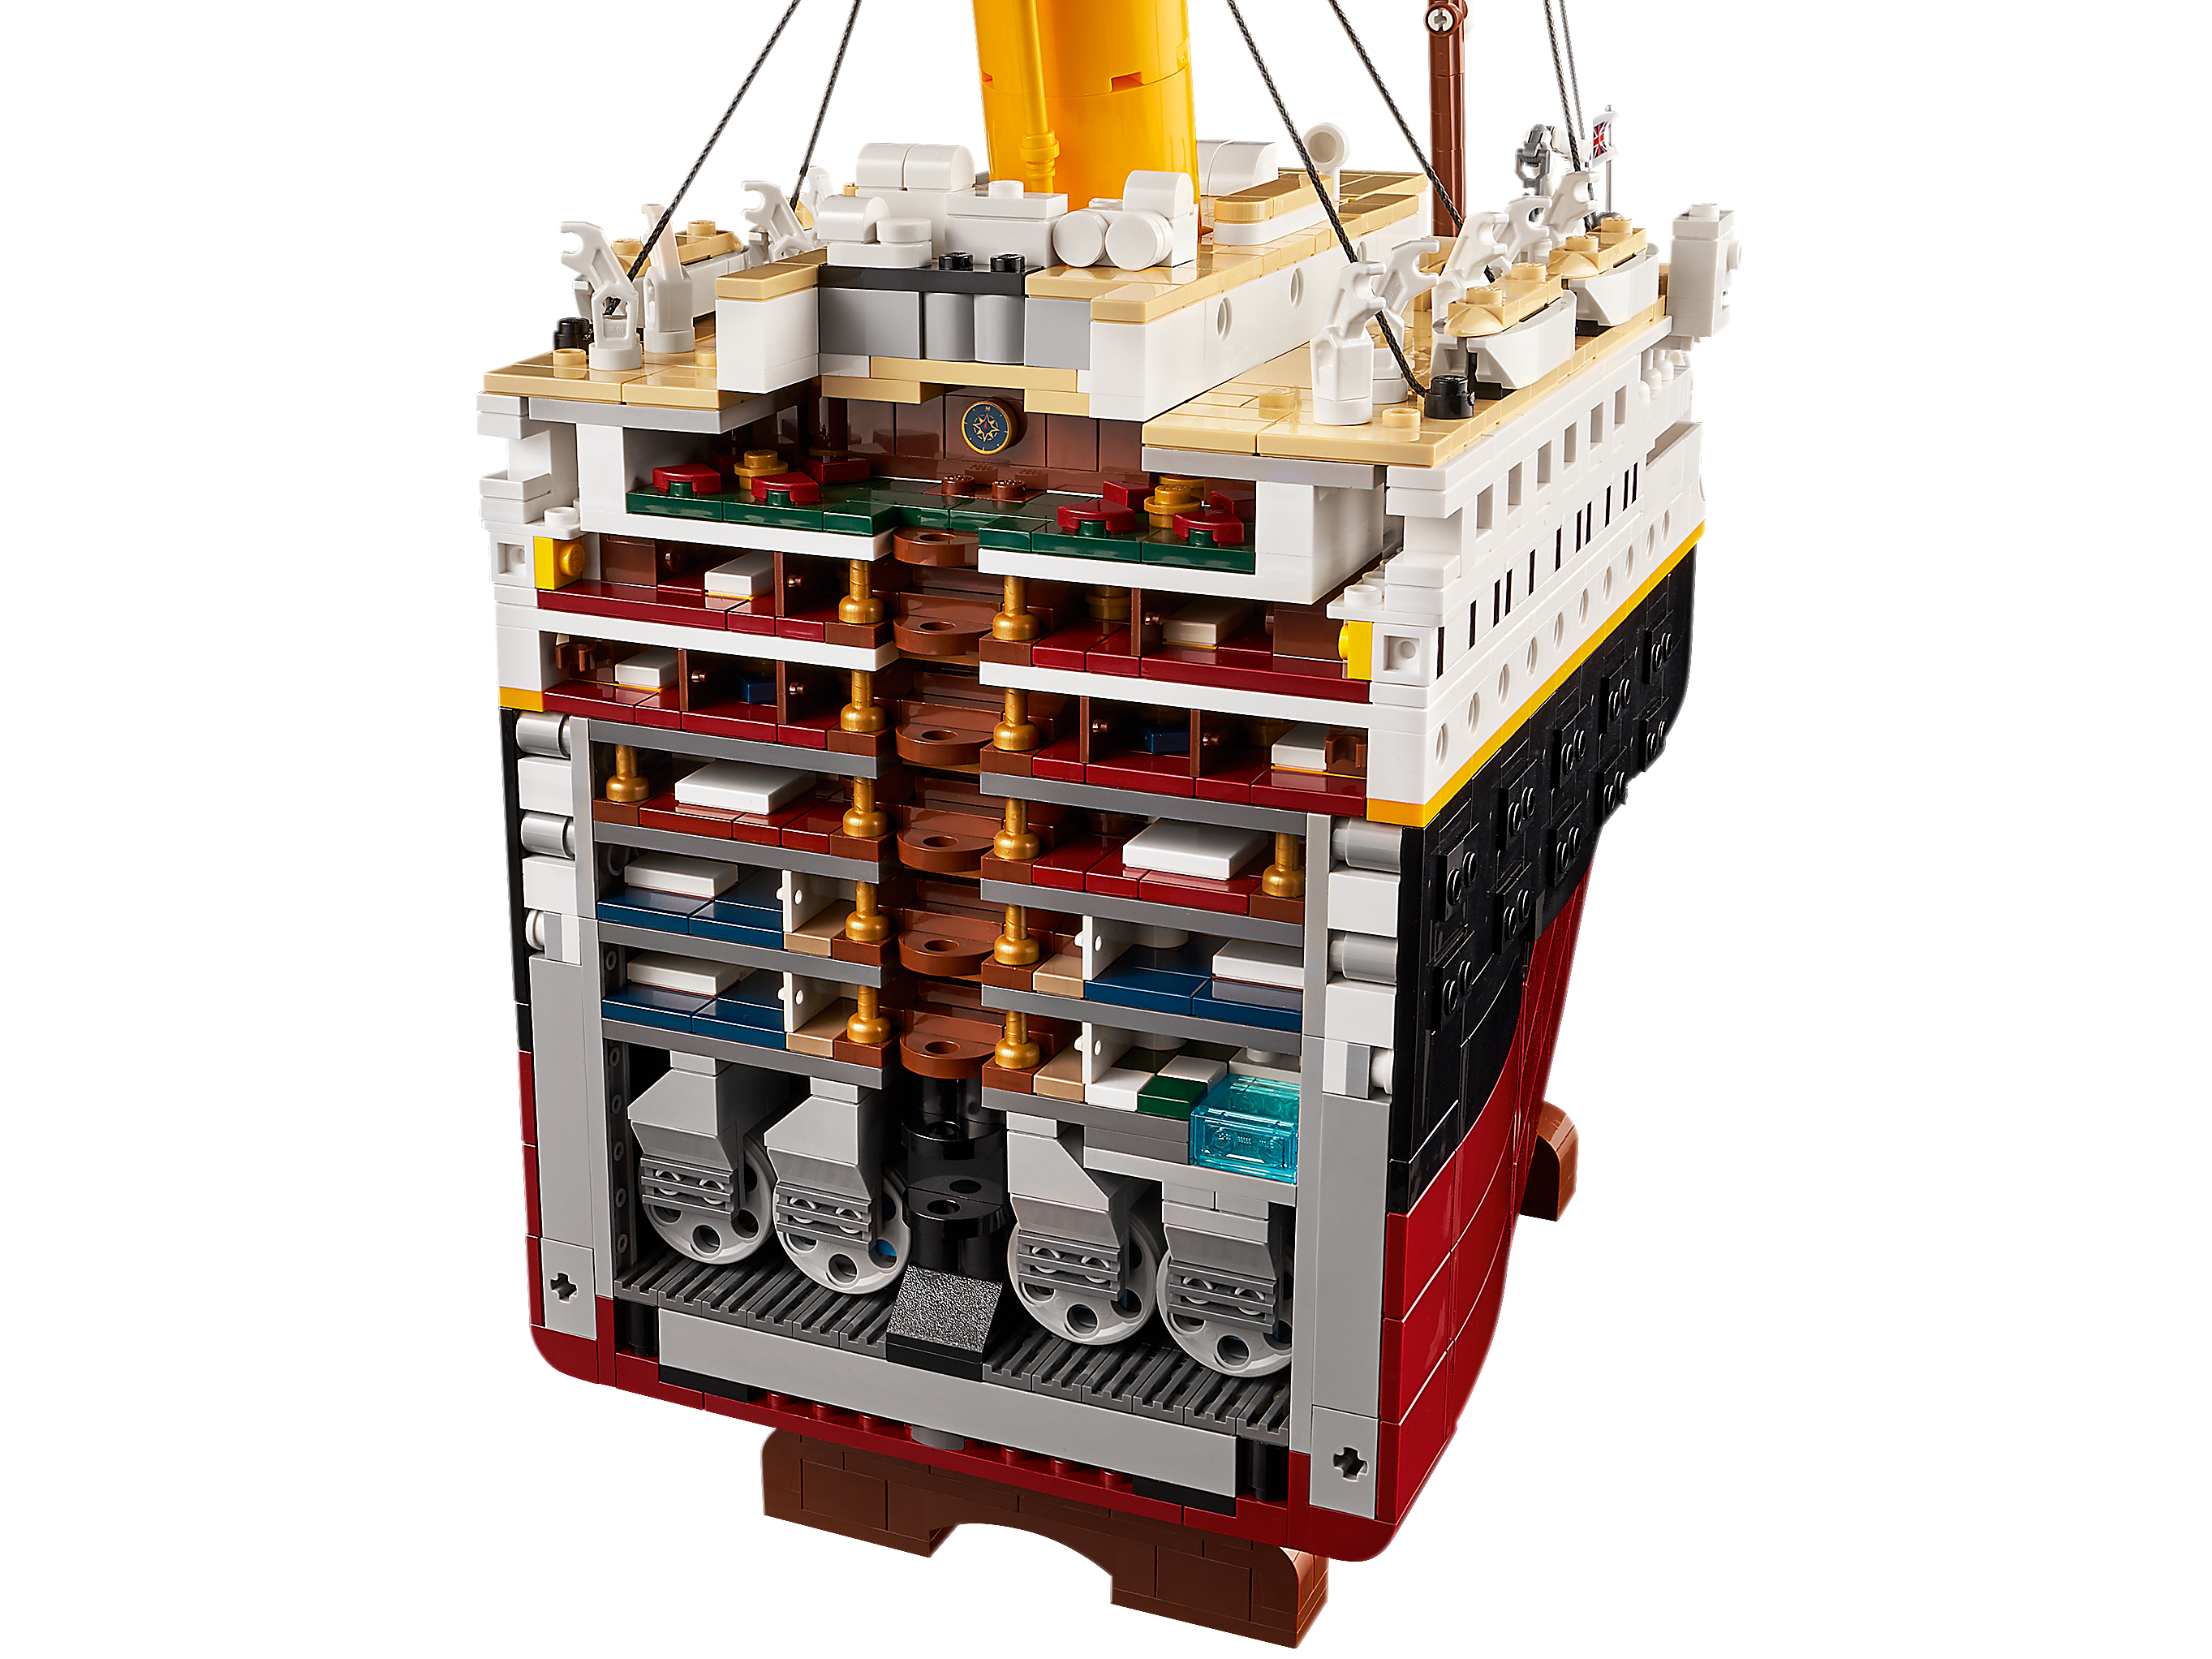 LEGO Creator Expert 10294 Titanic review and full gal